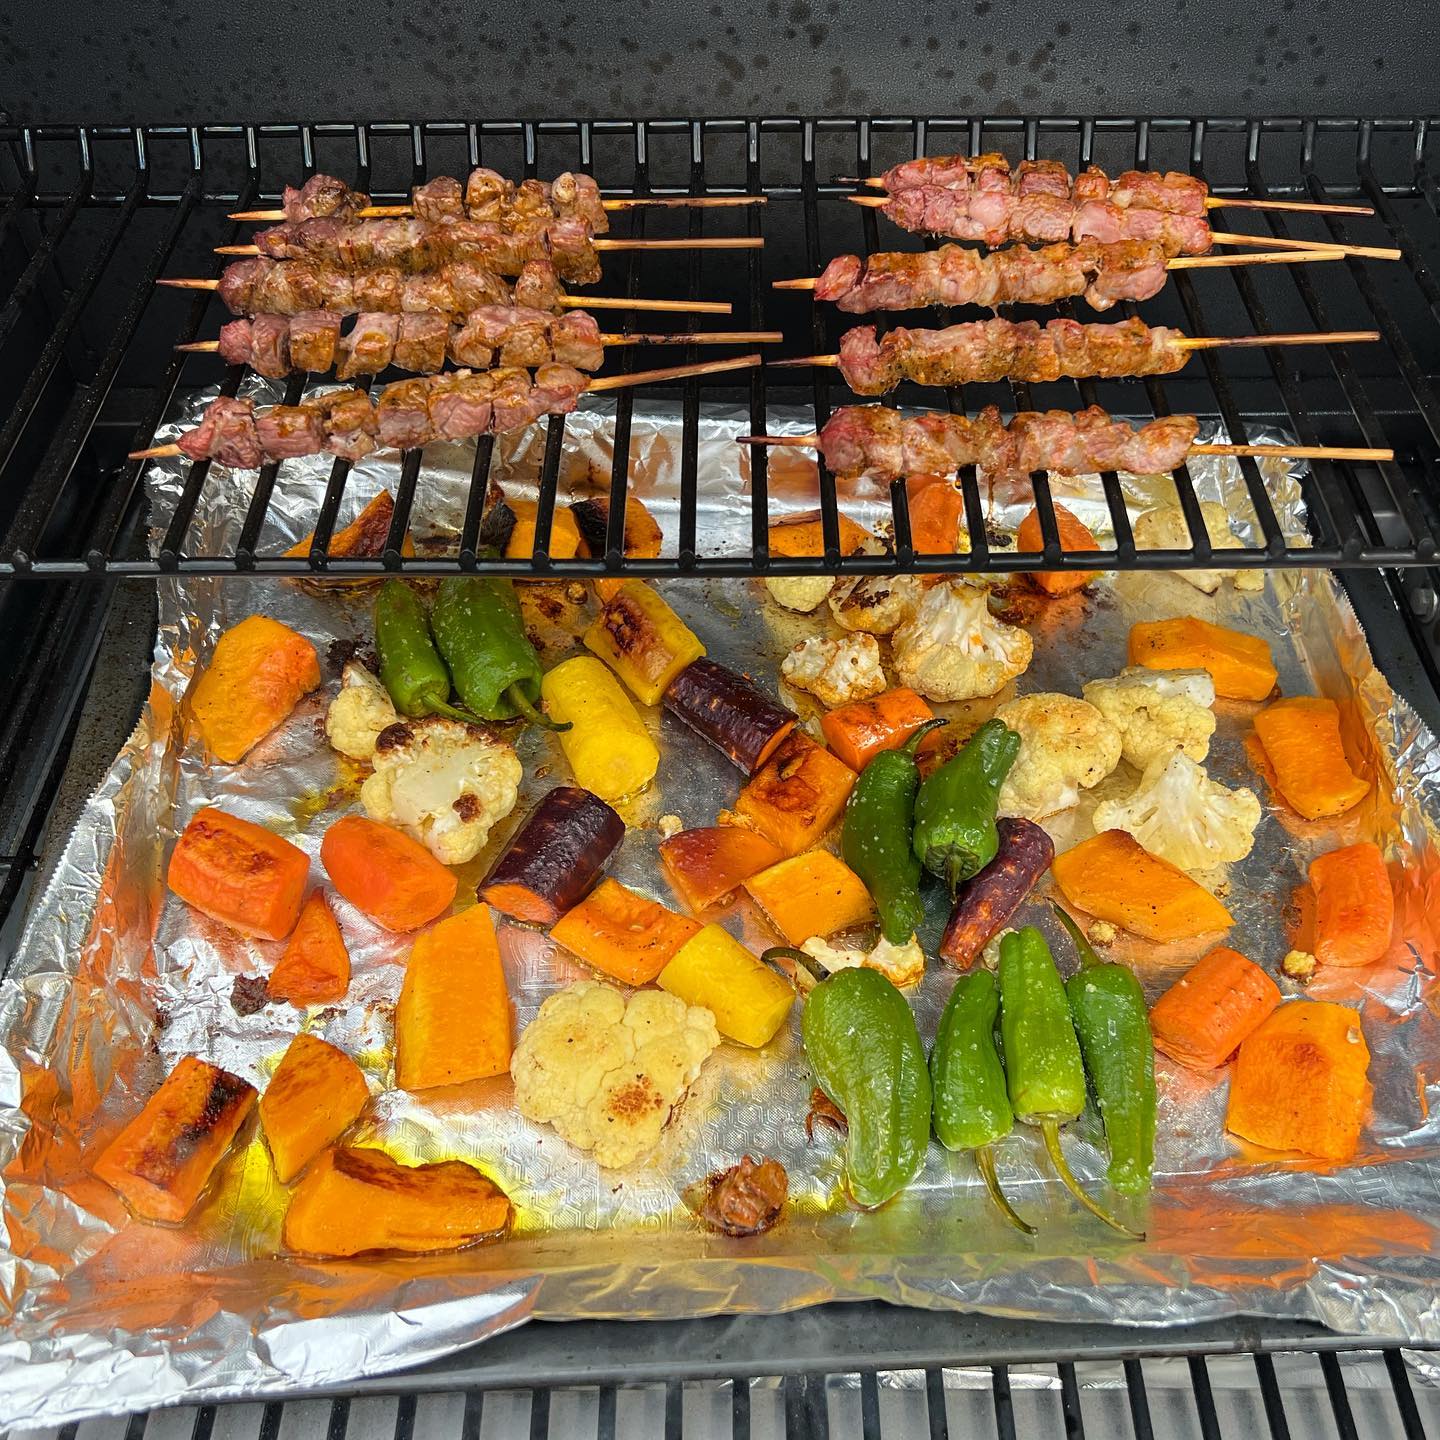 A light lunch on my new @traegergrills for lunch today with some tasty skewers